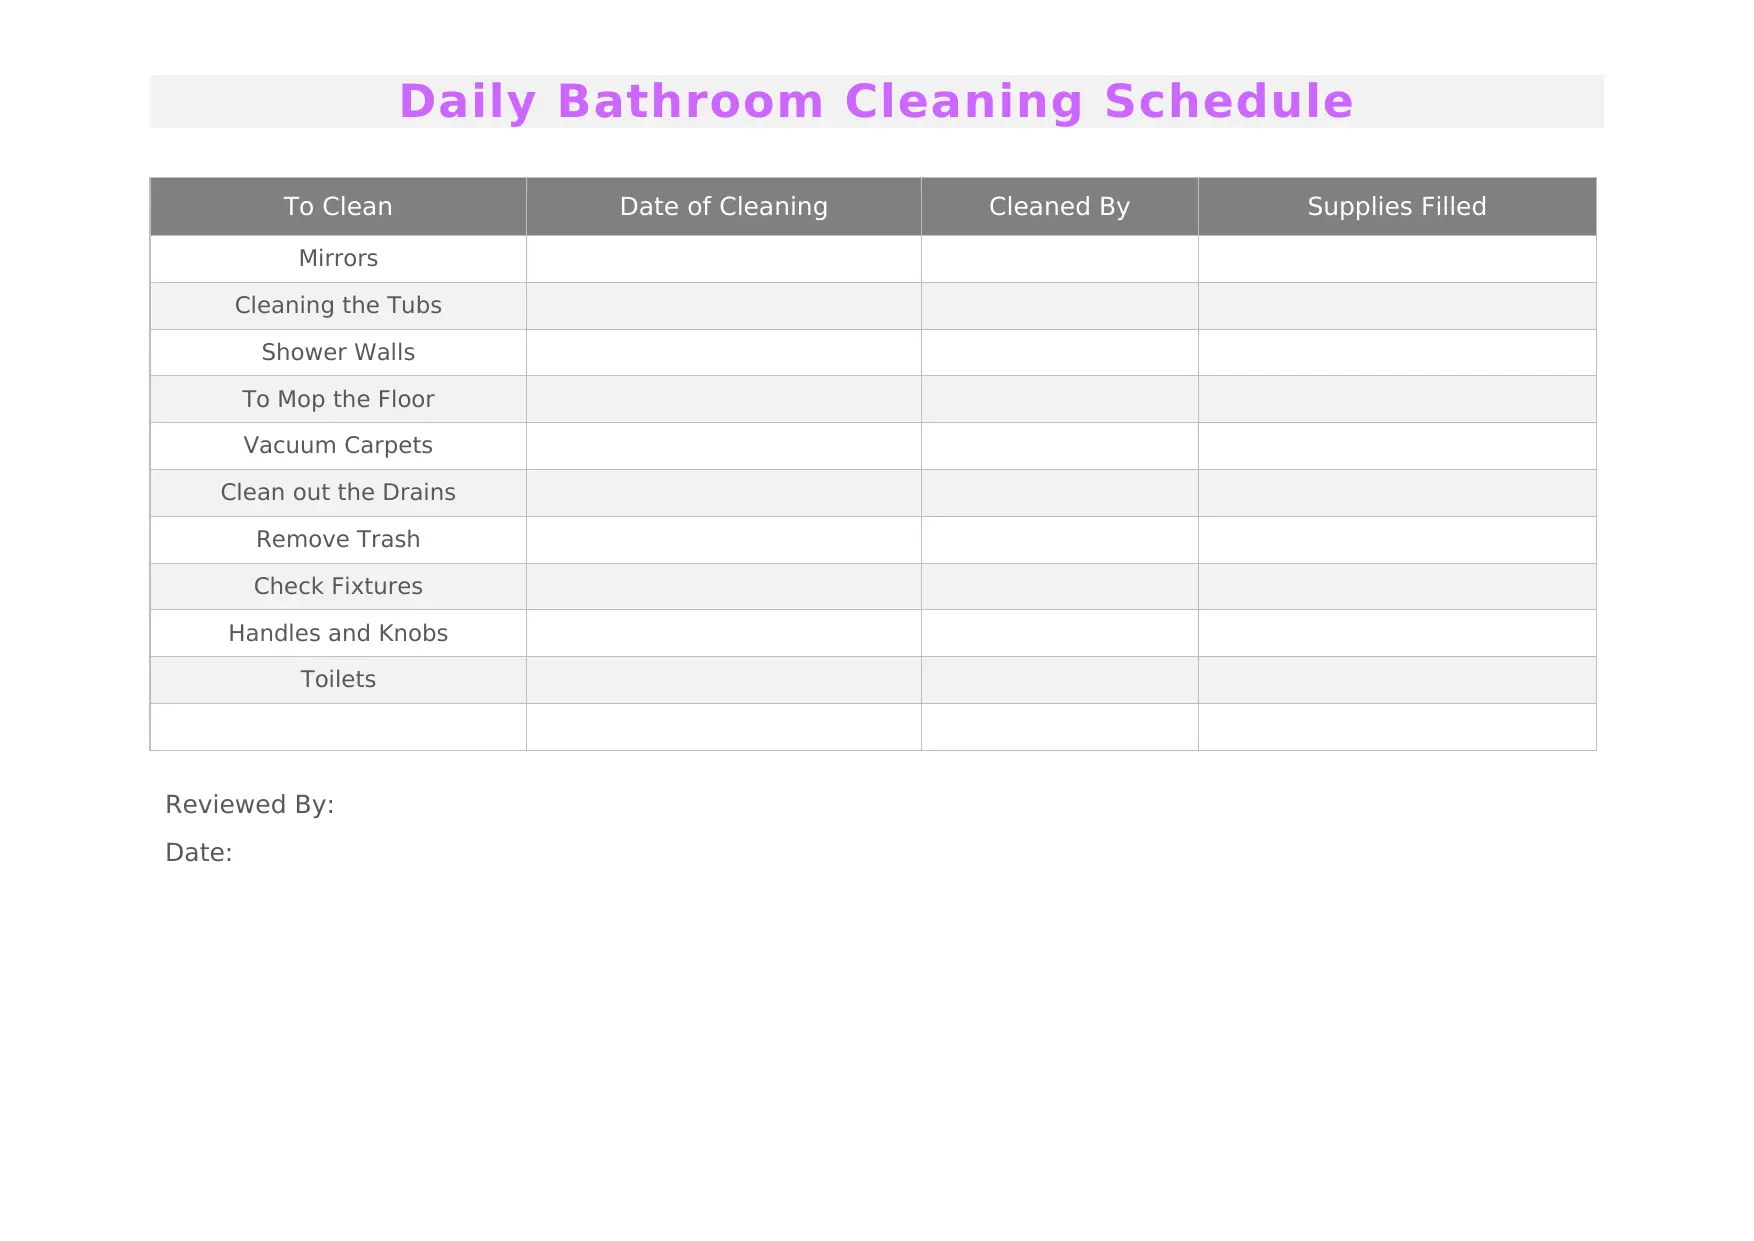 Daily Bathroom Cleaning Schedule Template